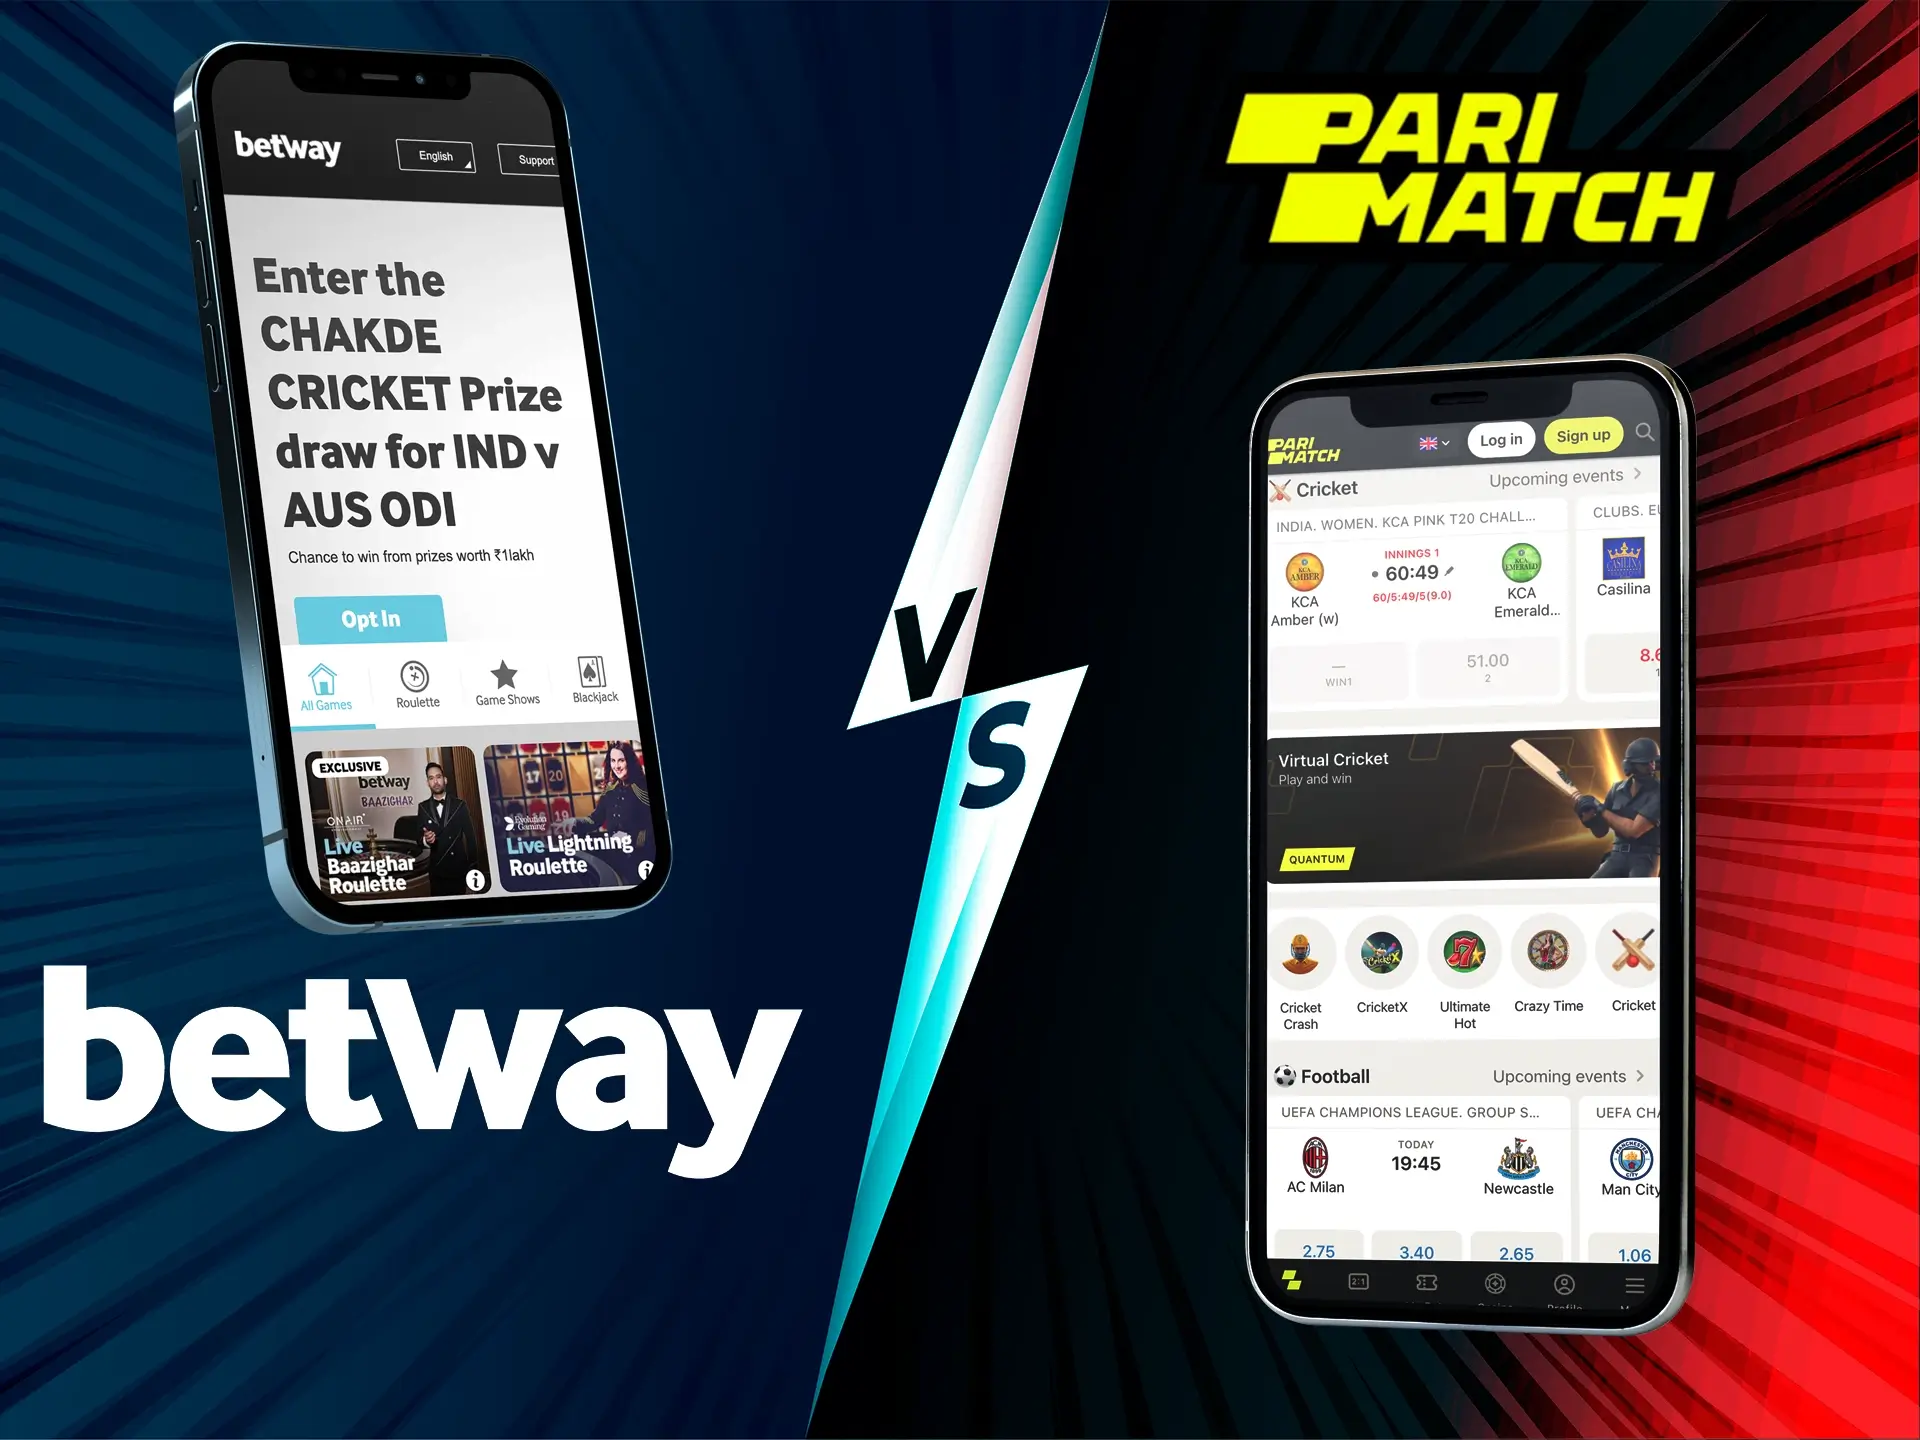 Two great mobile apps from Betway and Parimatch, take your pick.